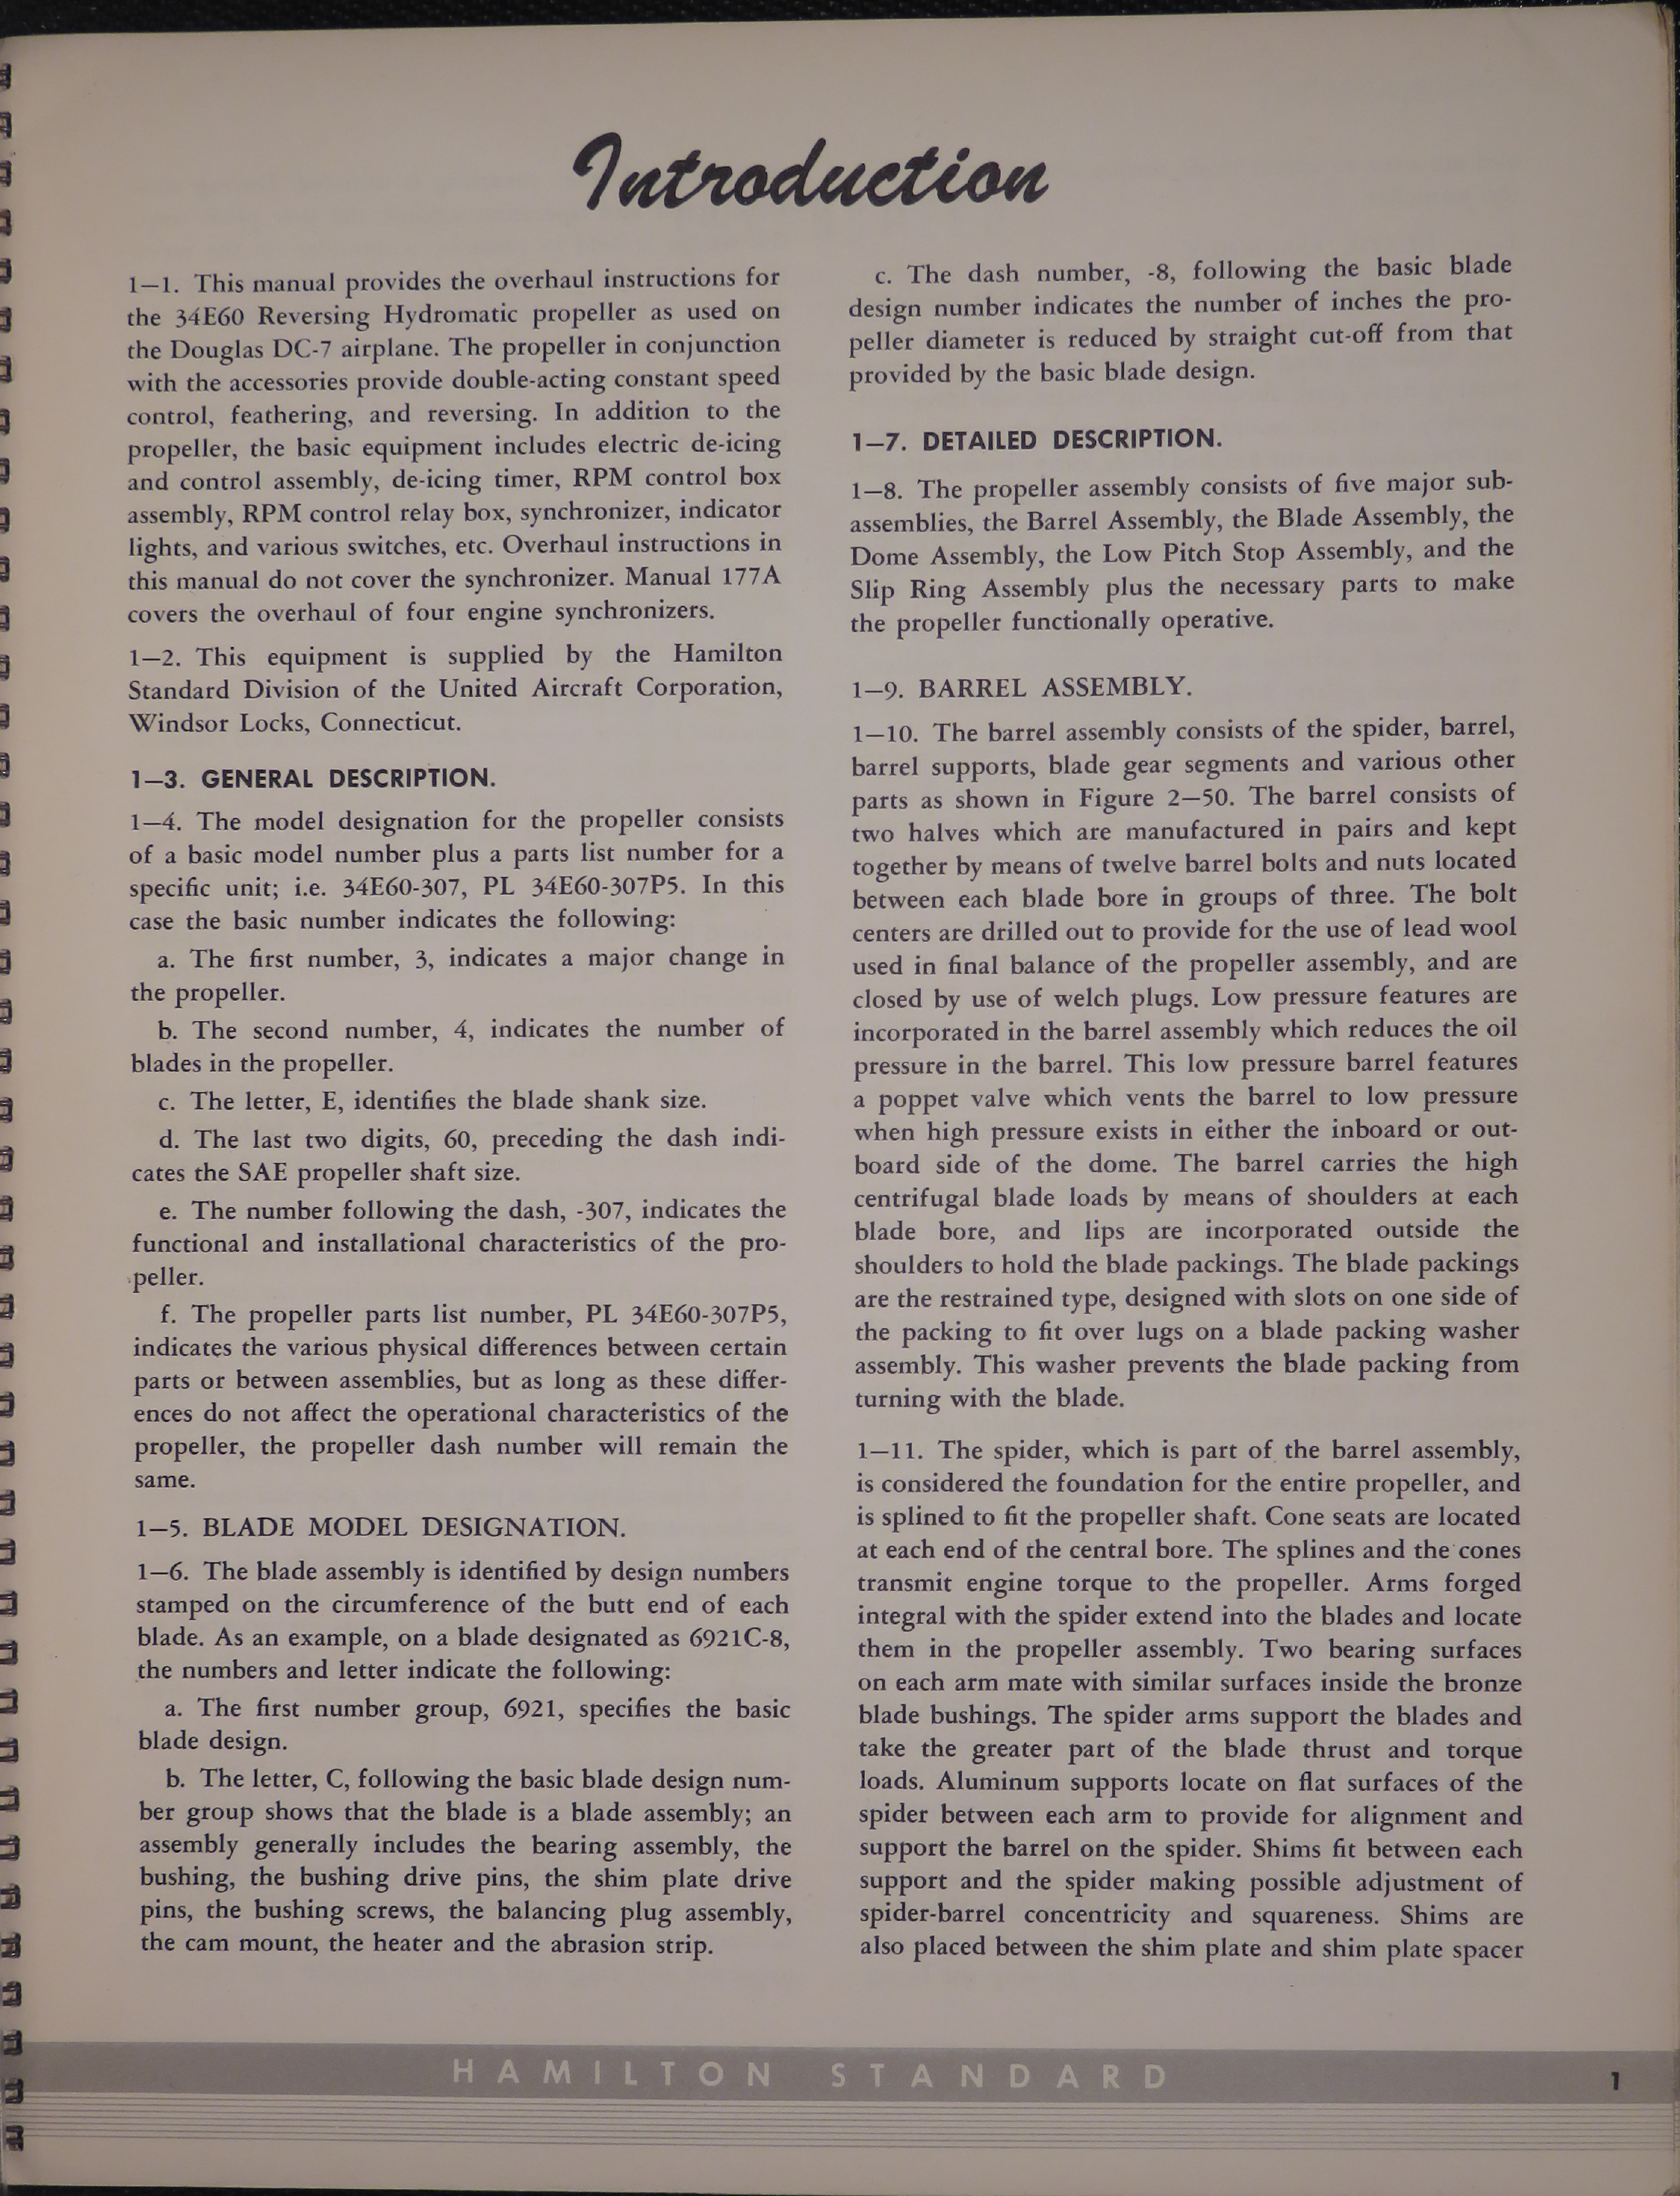 Sample page 7 from AirCorps Library document: Overhaul Manual for Hamilton Standard Model 34E60 Hydromatic Propeller